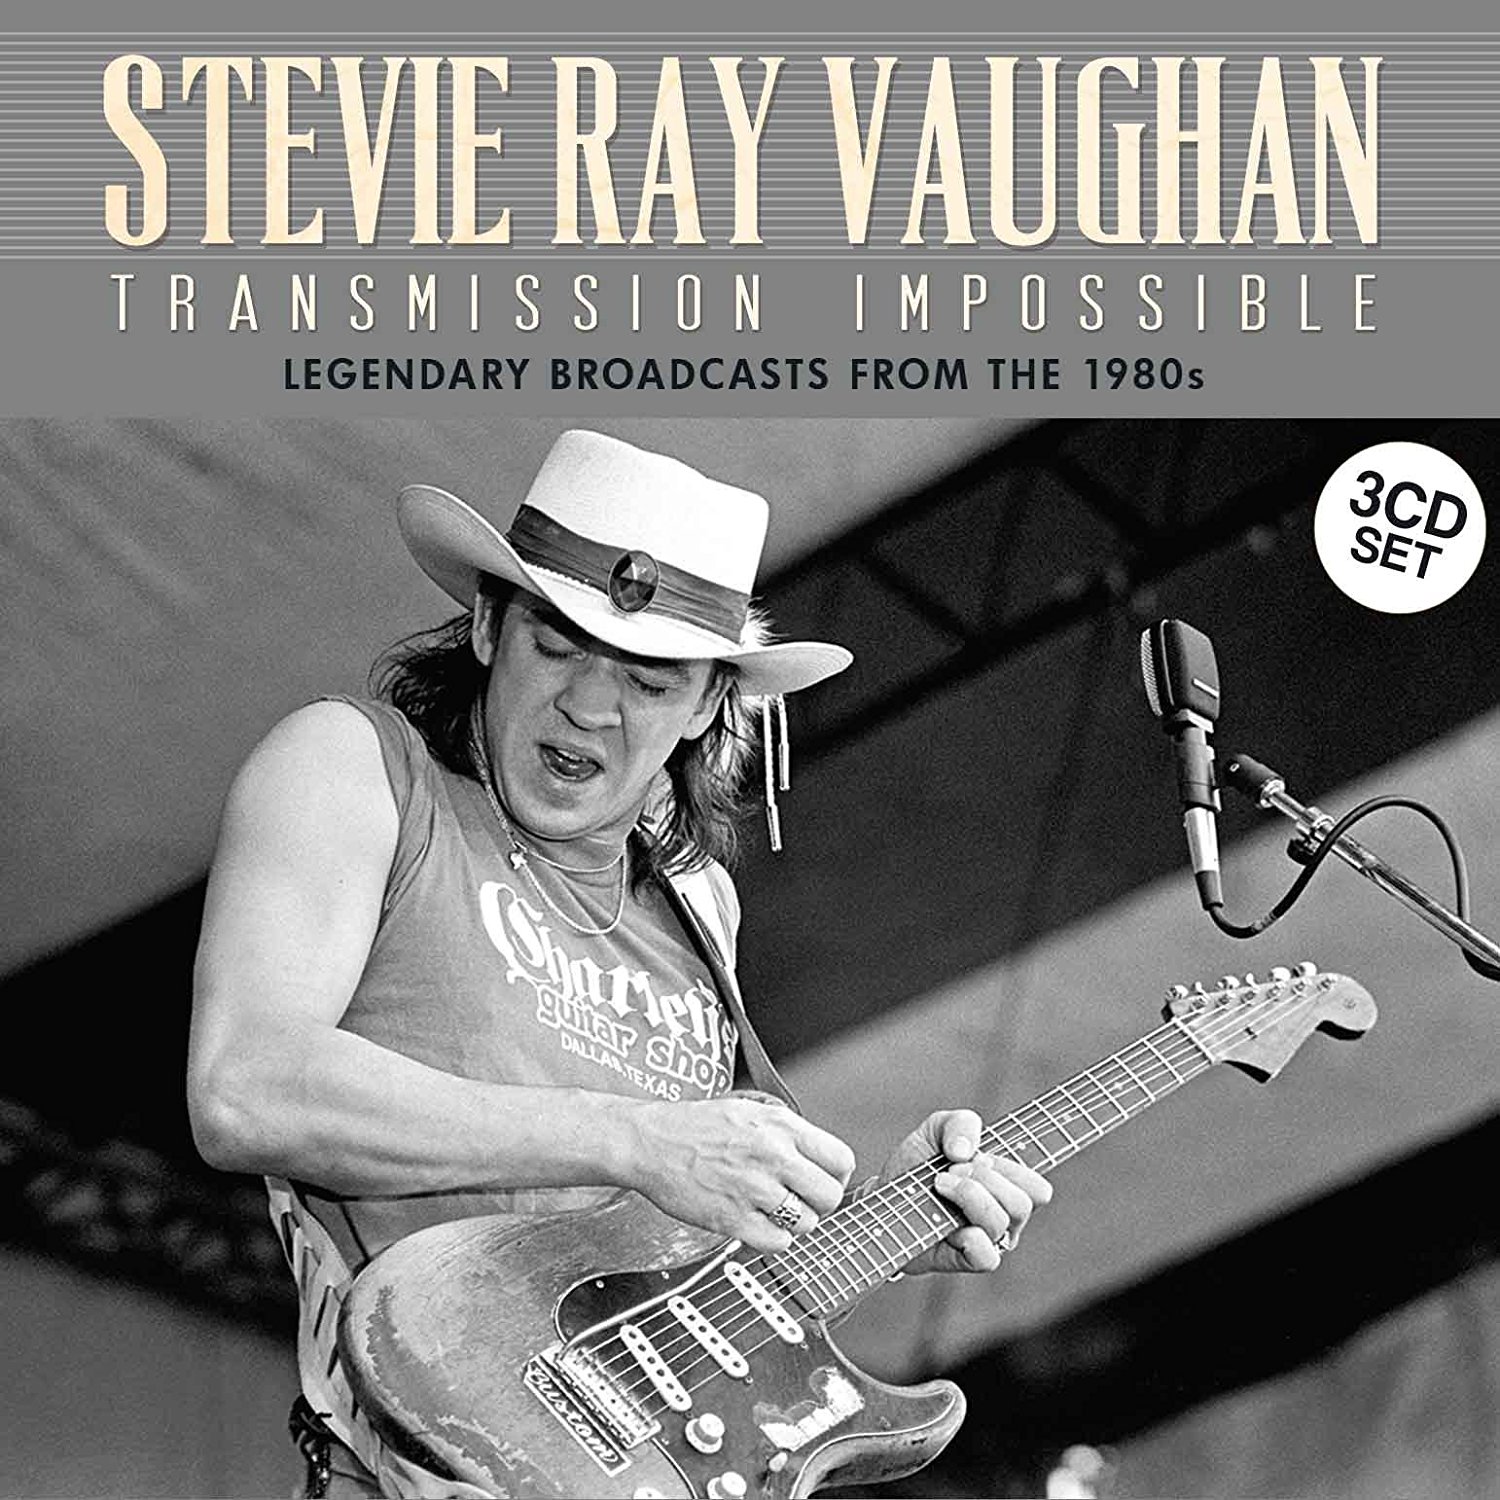 Stevie ray vaughan couldn